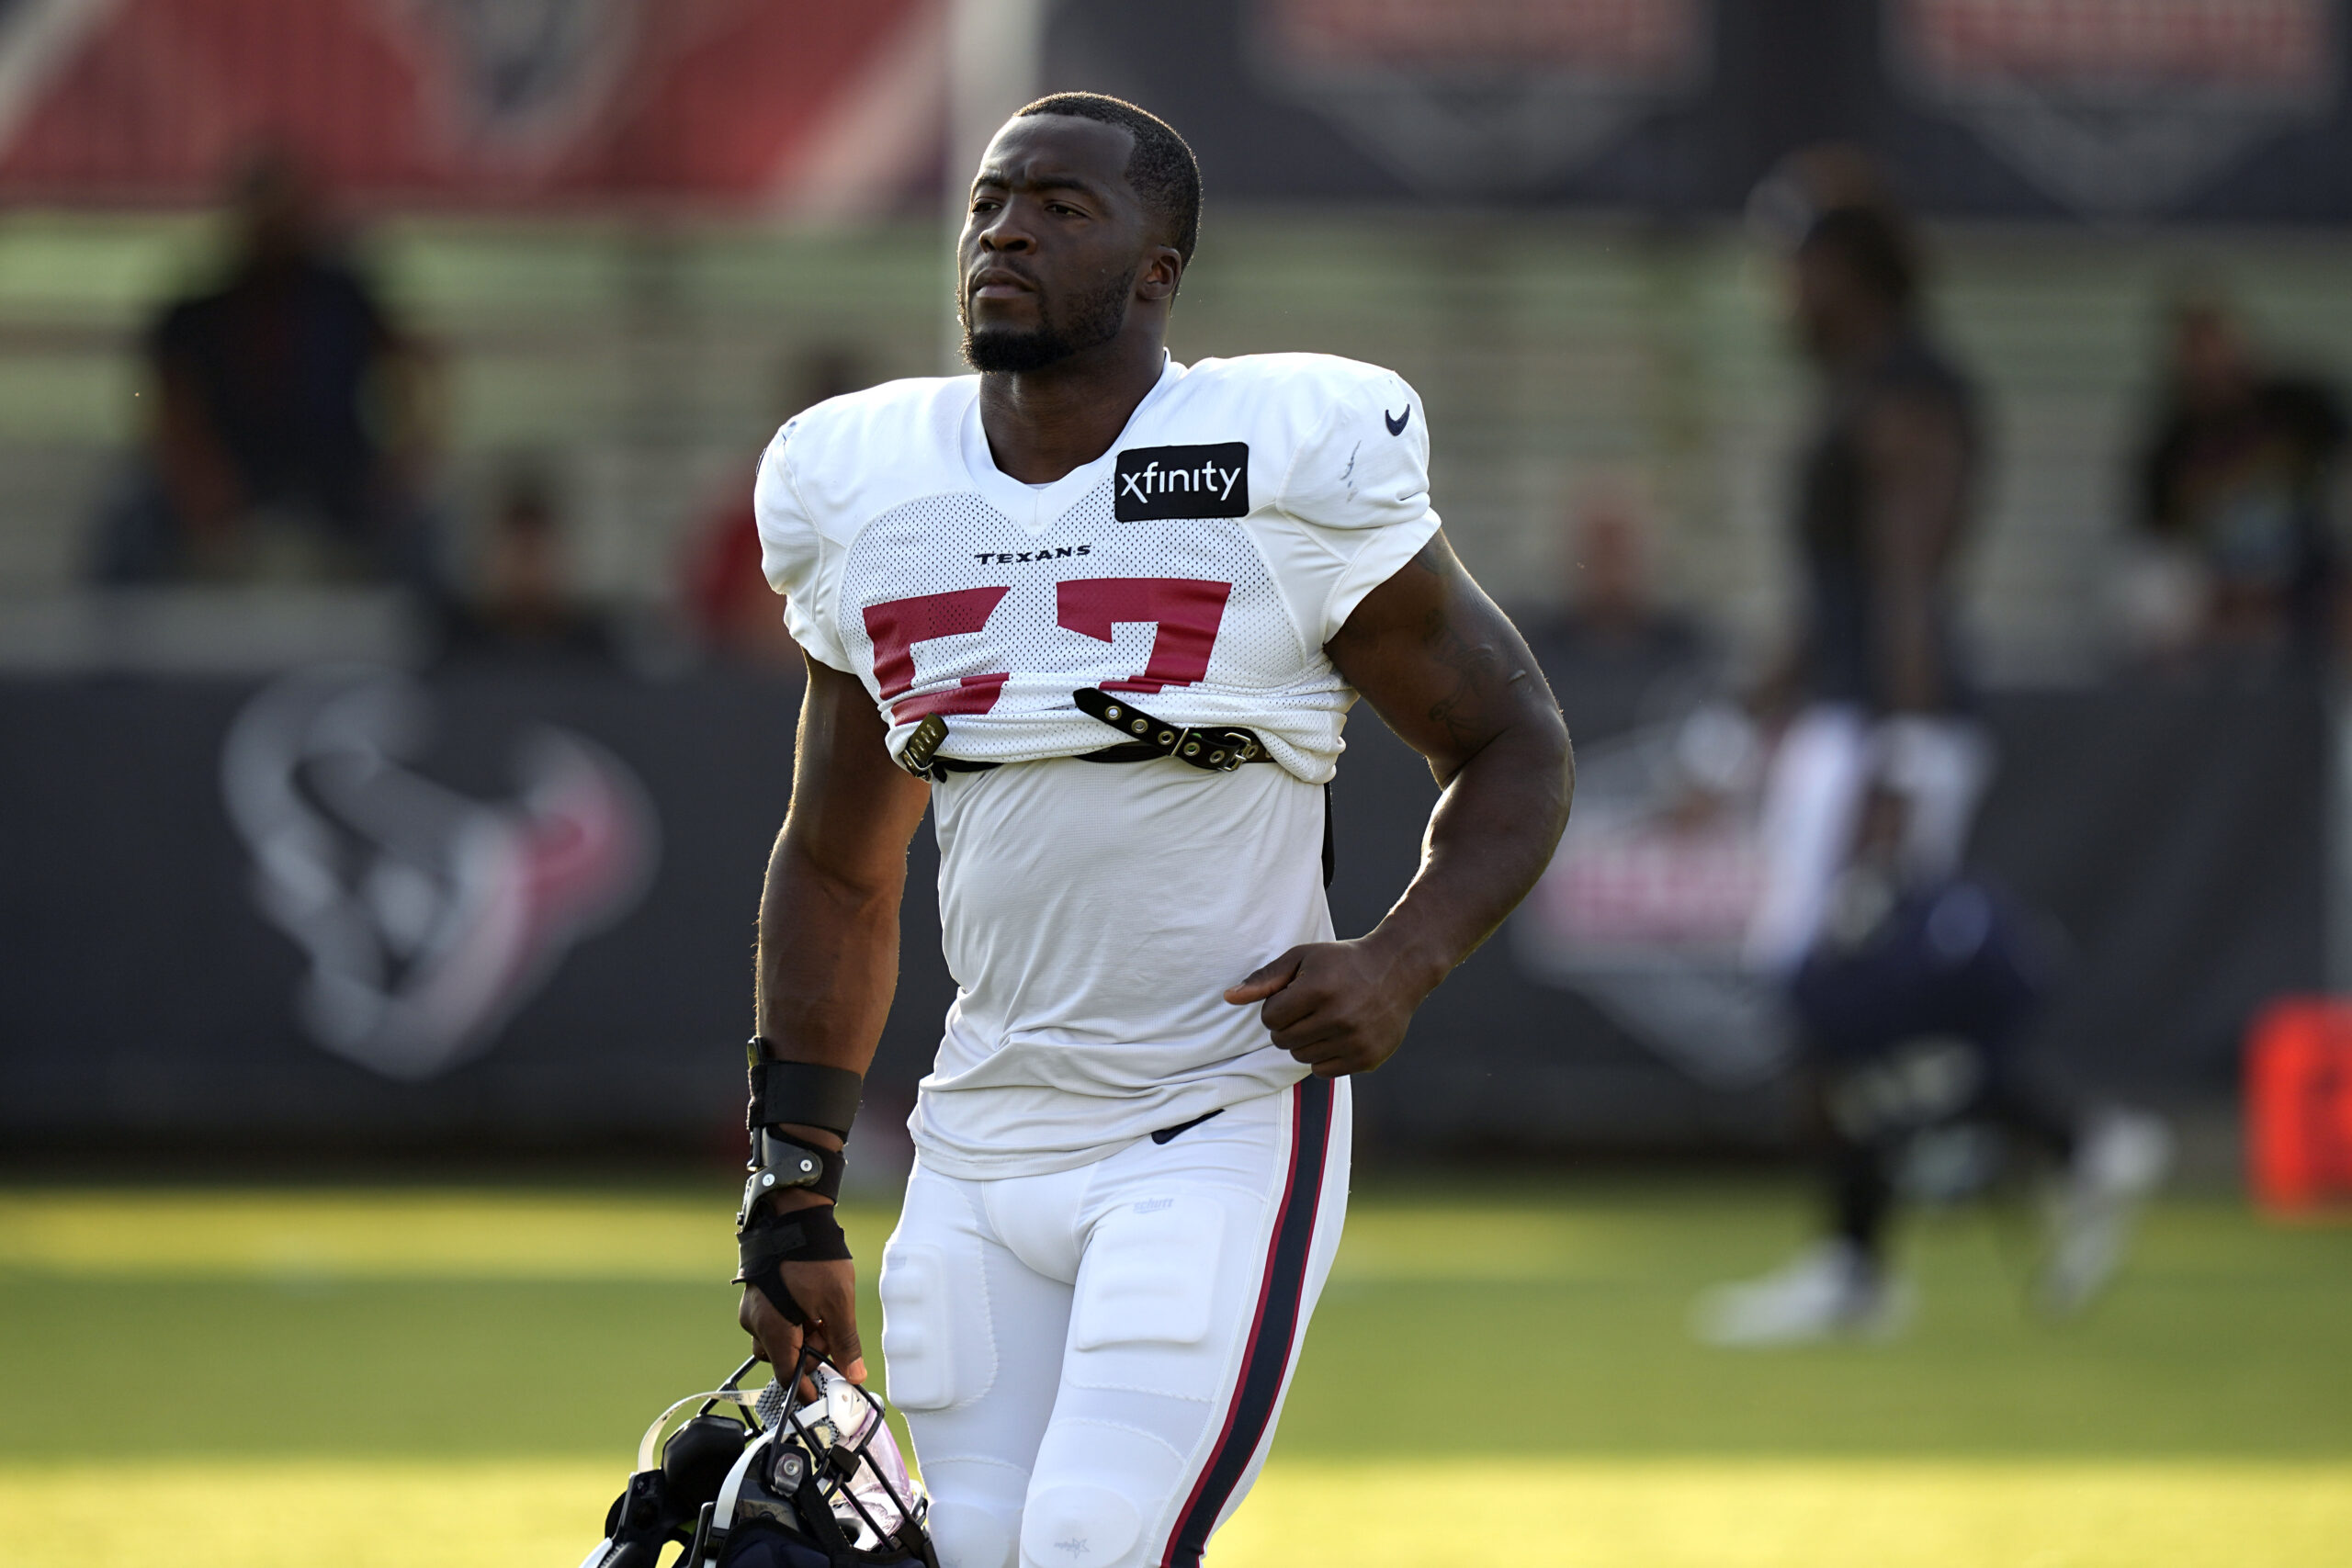 Texans place LB Kevin Pierre Louis on injured reserve, C Justin Britt on non-football illness list